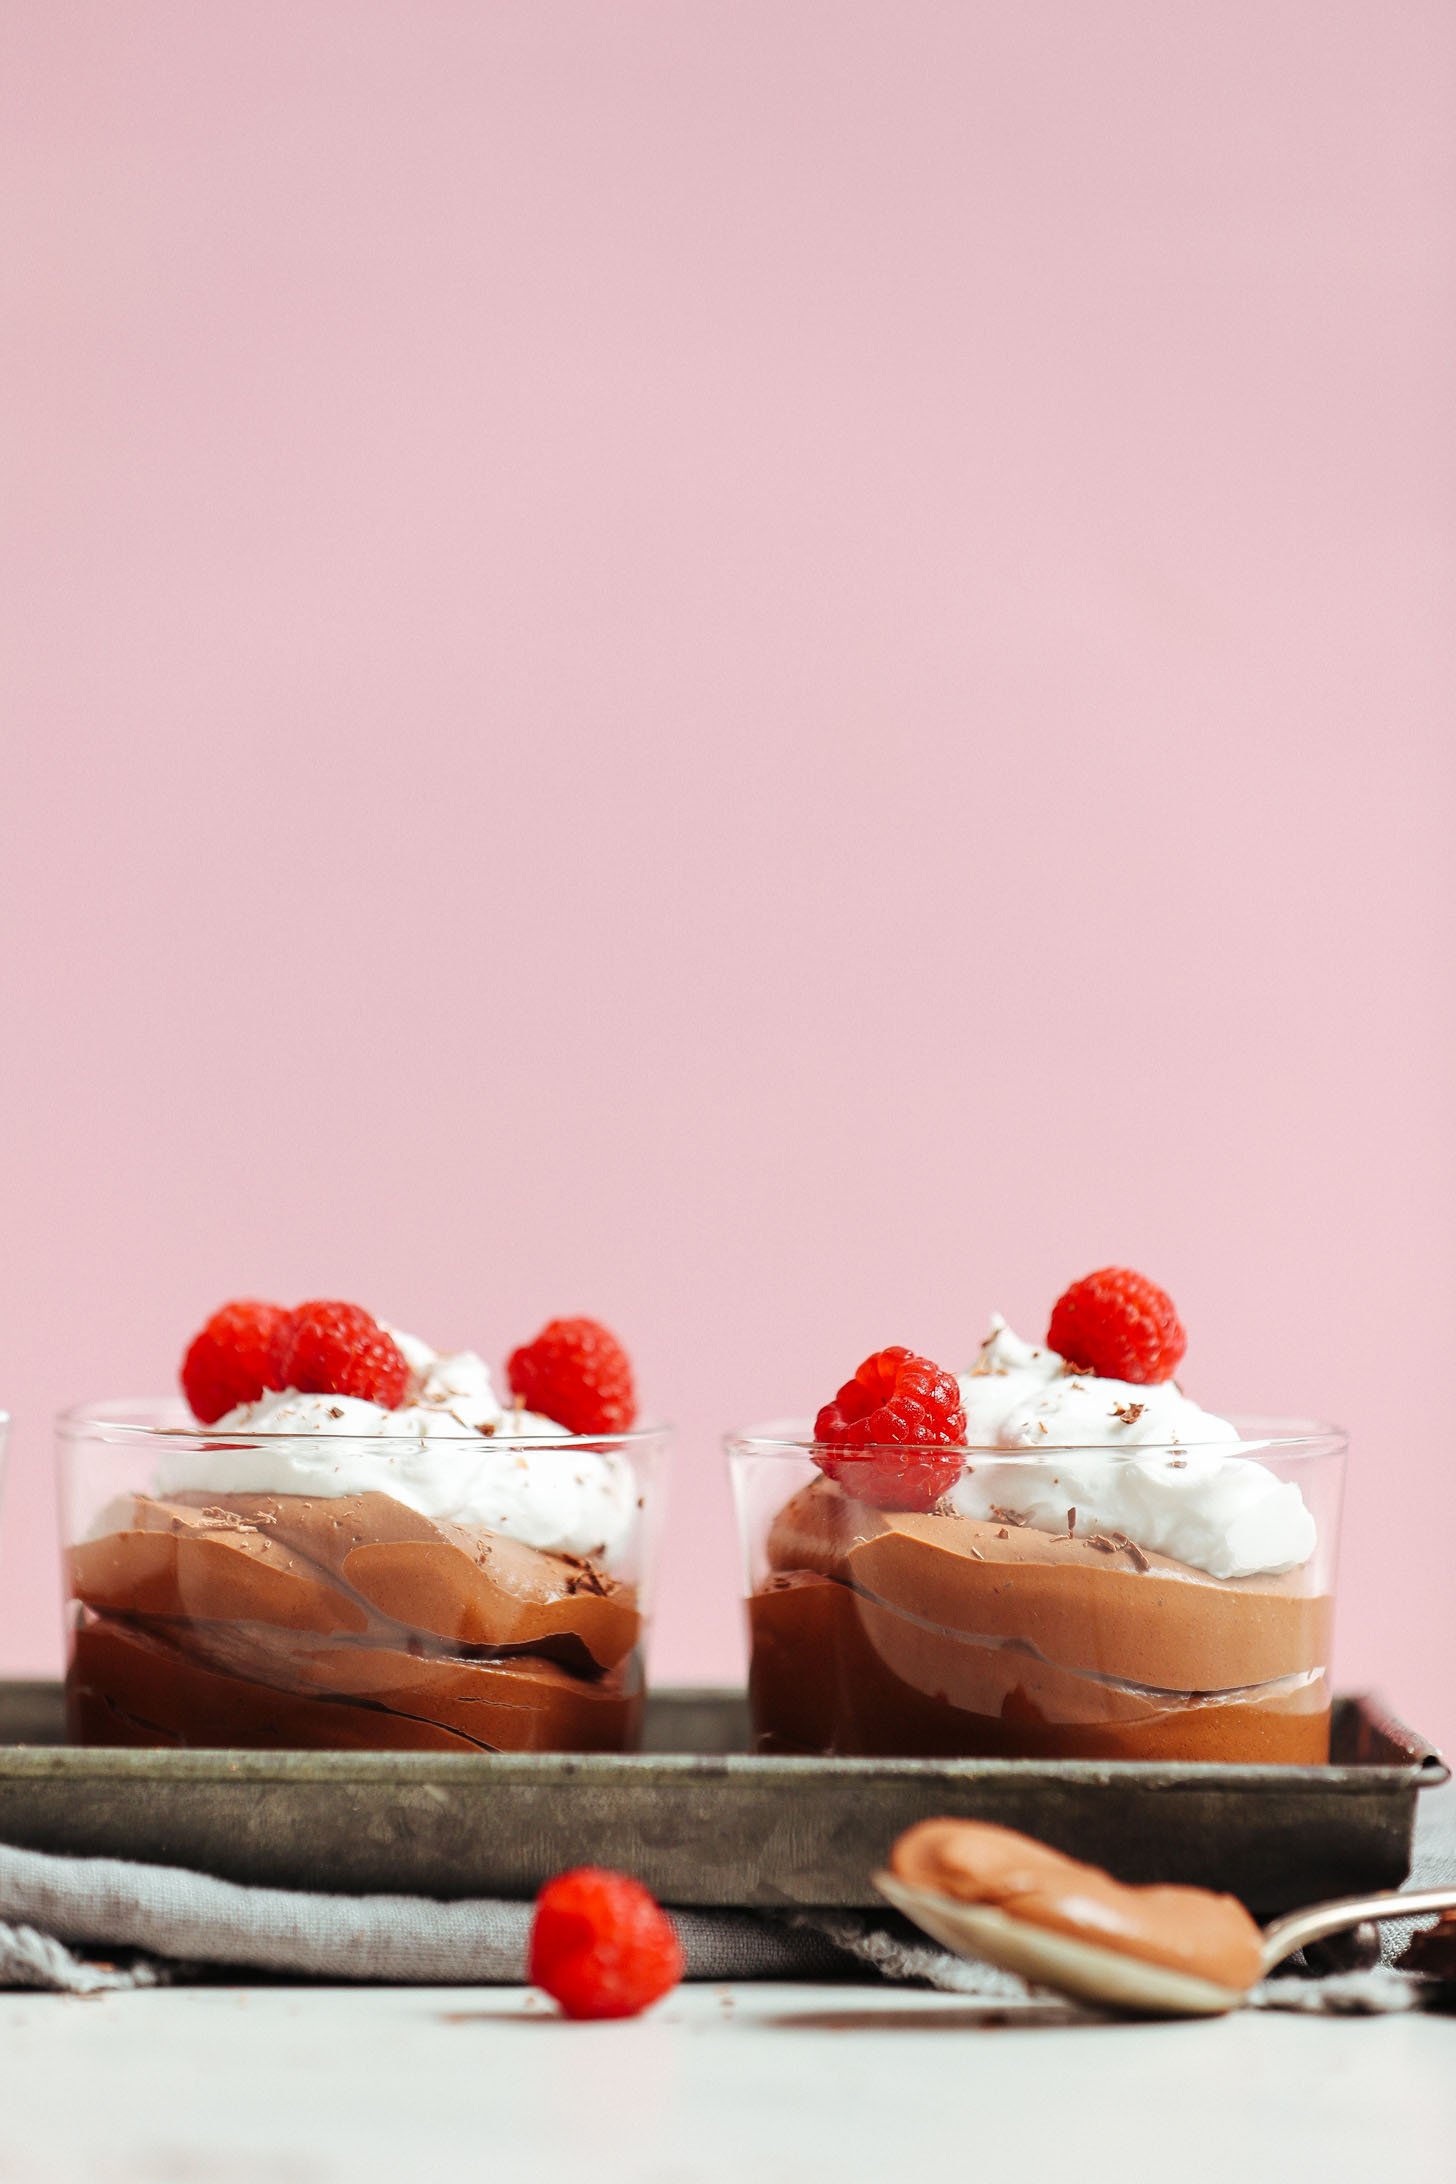 Two glasses filled with Naturally Sweetened Vegan Chocolate Mousse and topped with coconut whipped cream, fresh raspberries, and shaved chocolate